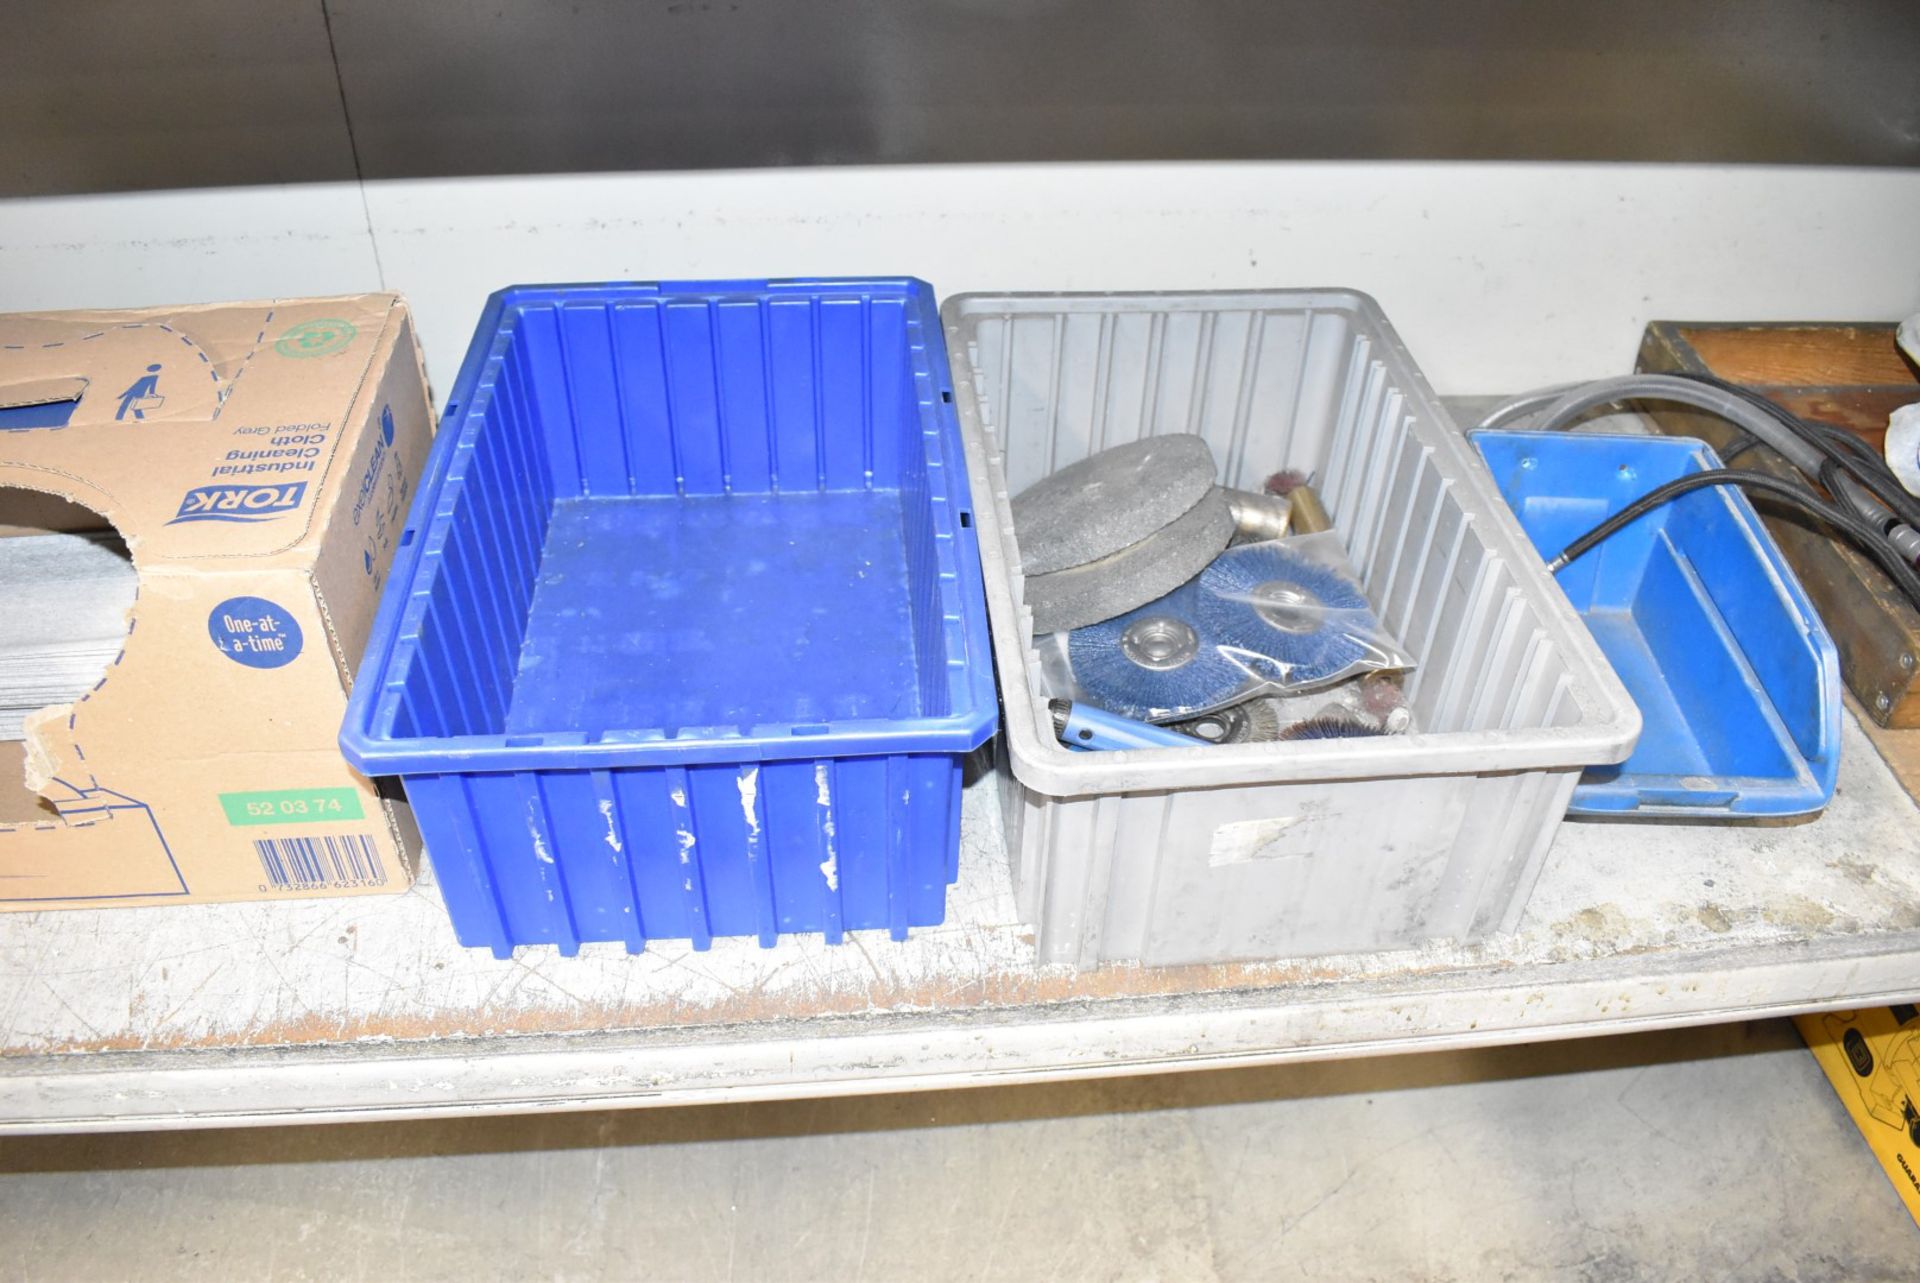 LOT/ STEEL SHELVES WITH CONTENTS CONSISTING OF GRINDERS, DEBURRING, POLISHING & CLEANING SUPPLIES - Image 6 of 6